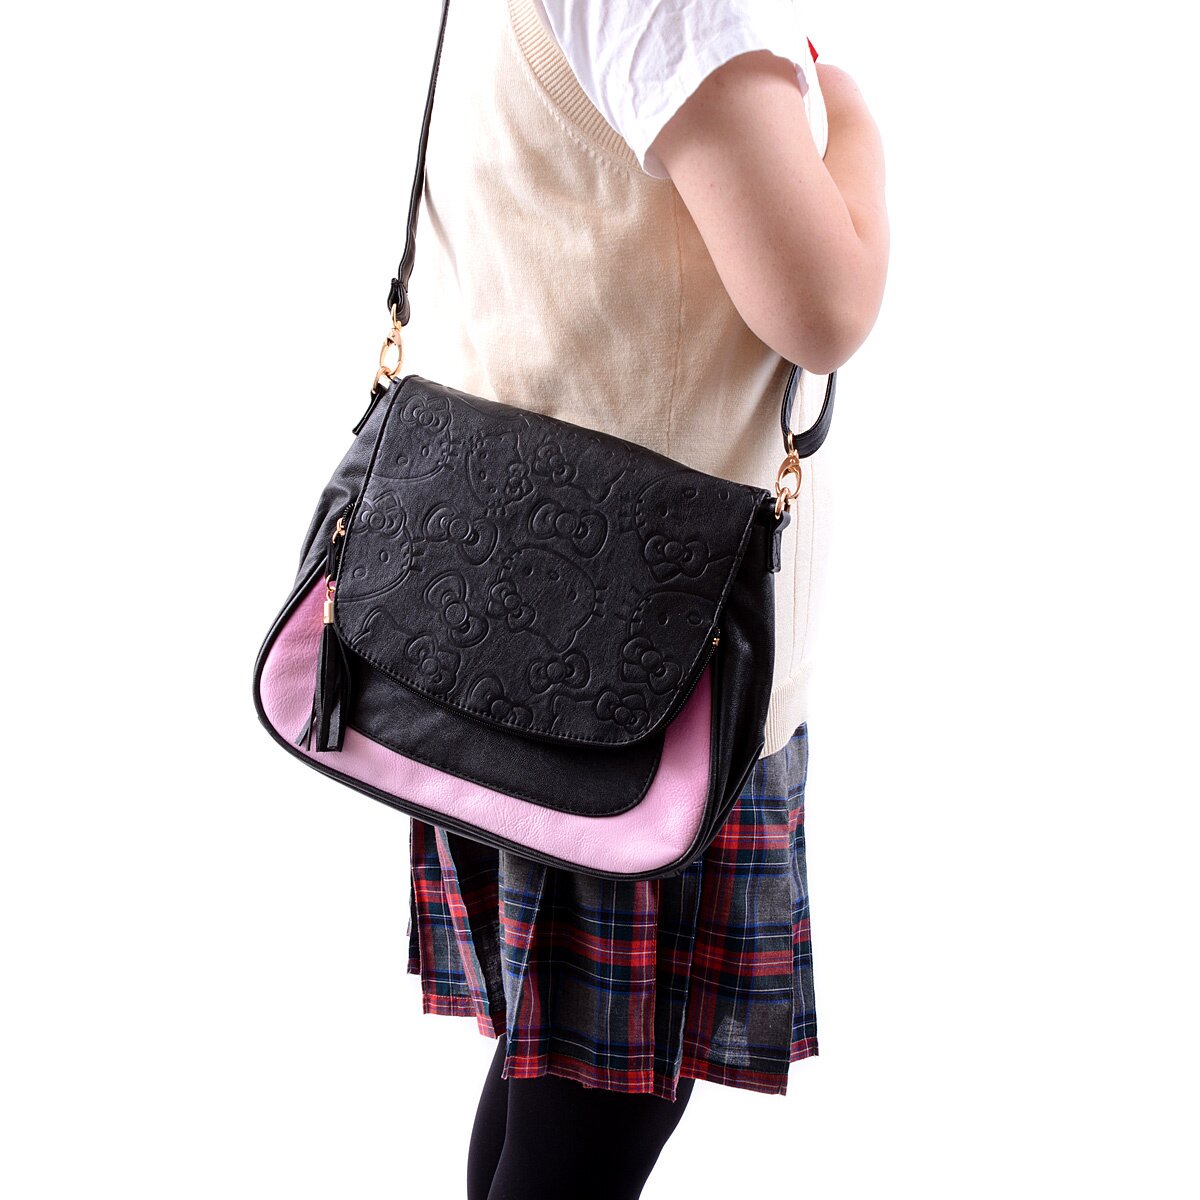 Hello Kitty - Pink Quilted 9” Faux Leather Crossbody Bag by Danielle Nicole  | Popcultcha